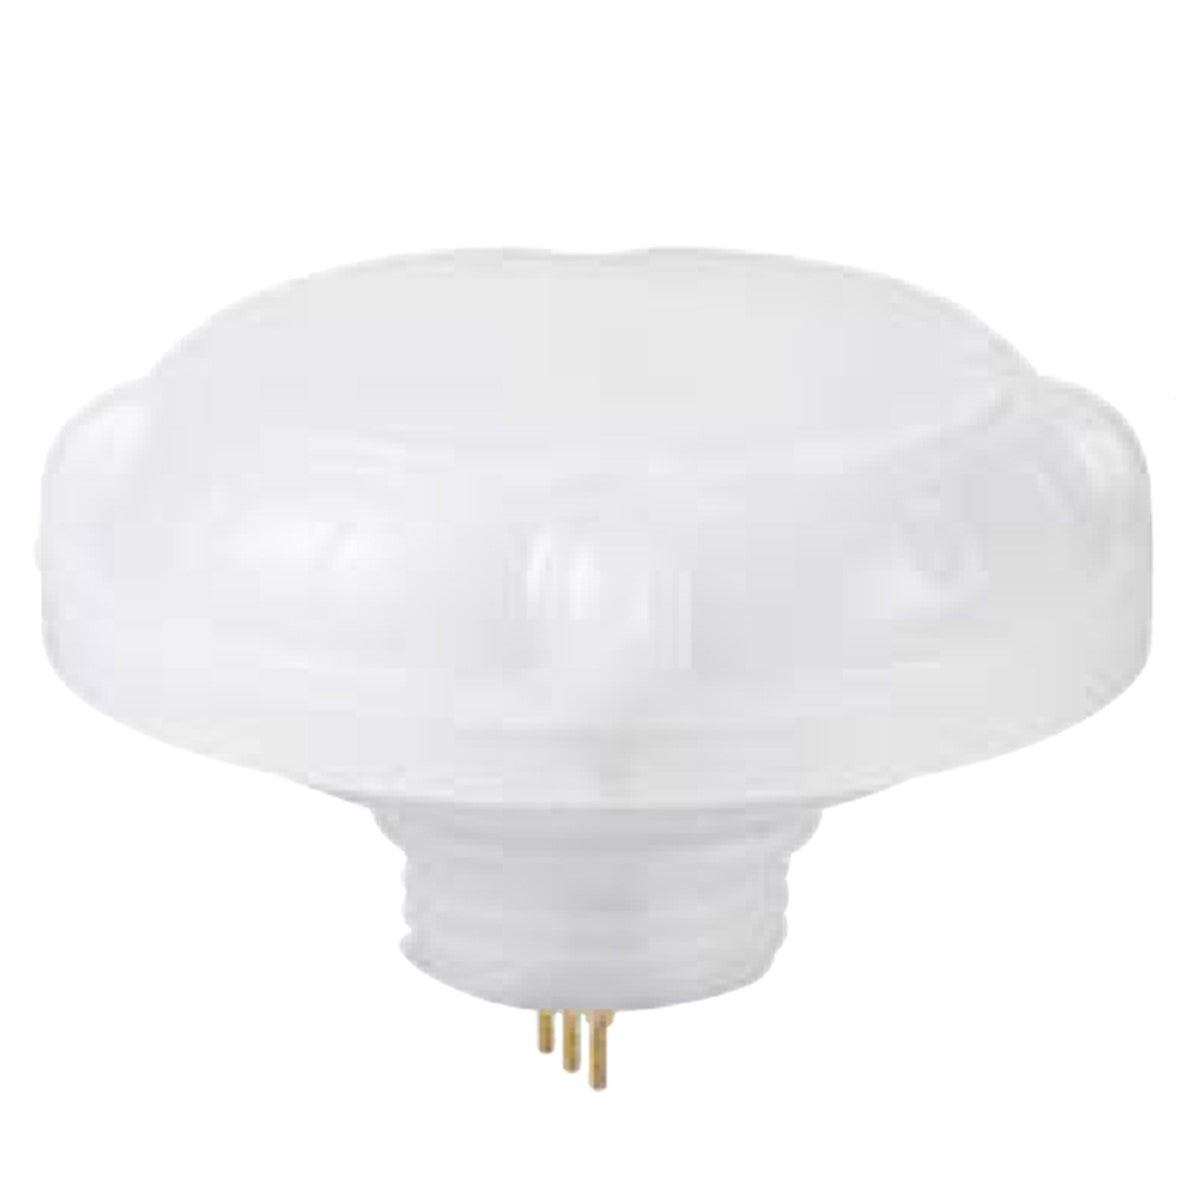 Sylvania High Bay Mircrowave Motion/Daylight Sensor, Remote Required To Change Default Settings